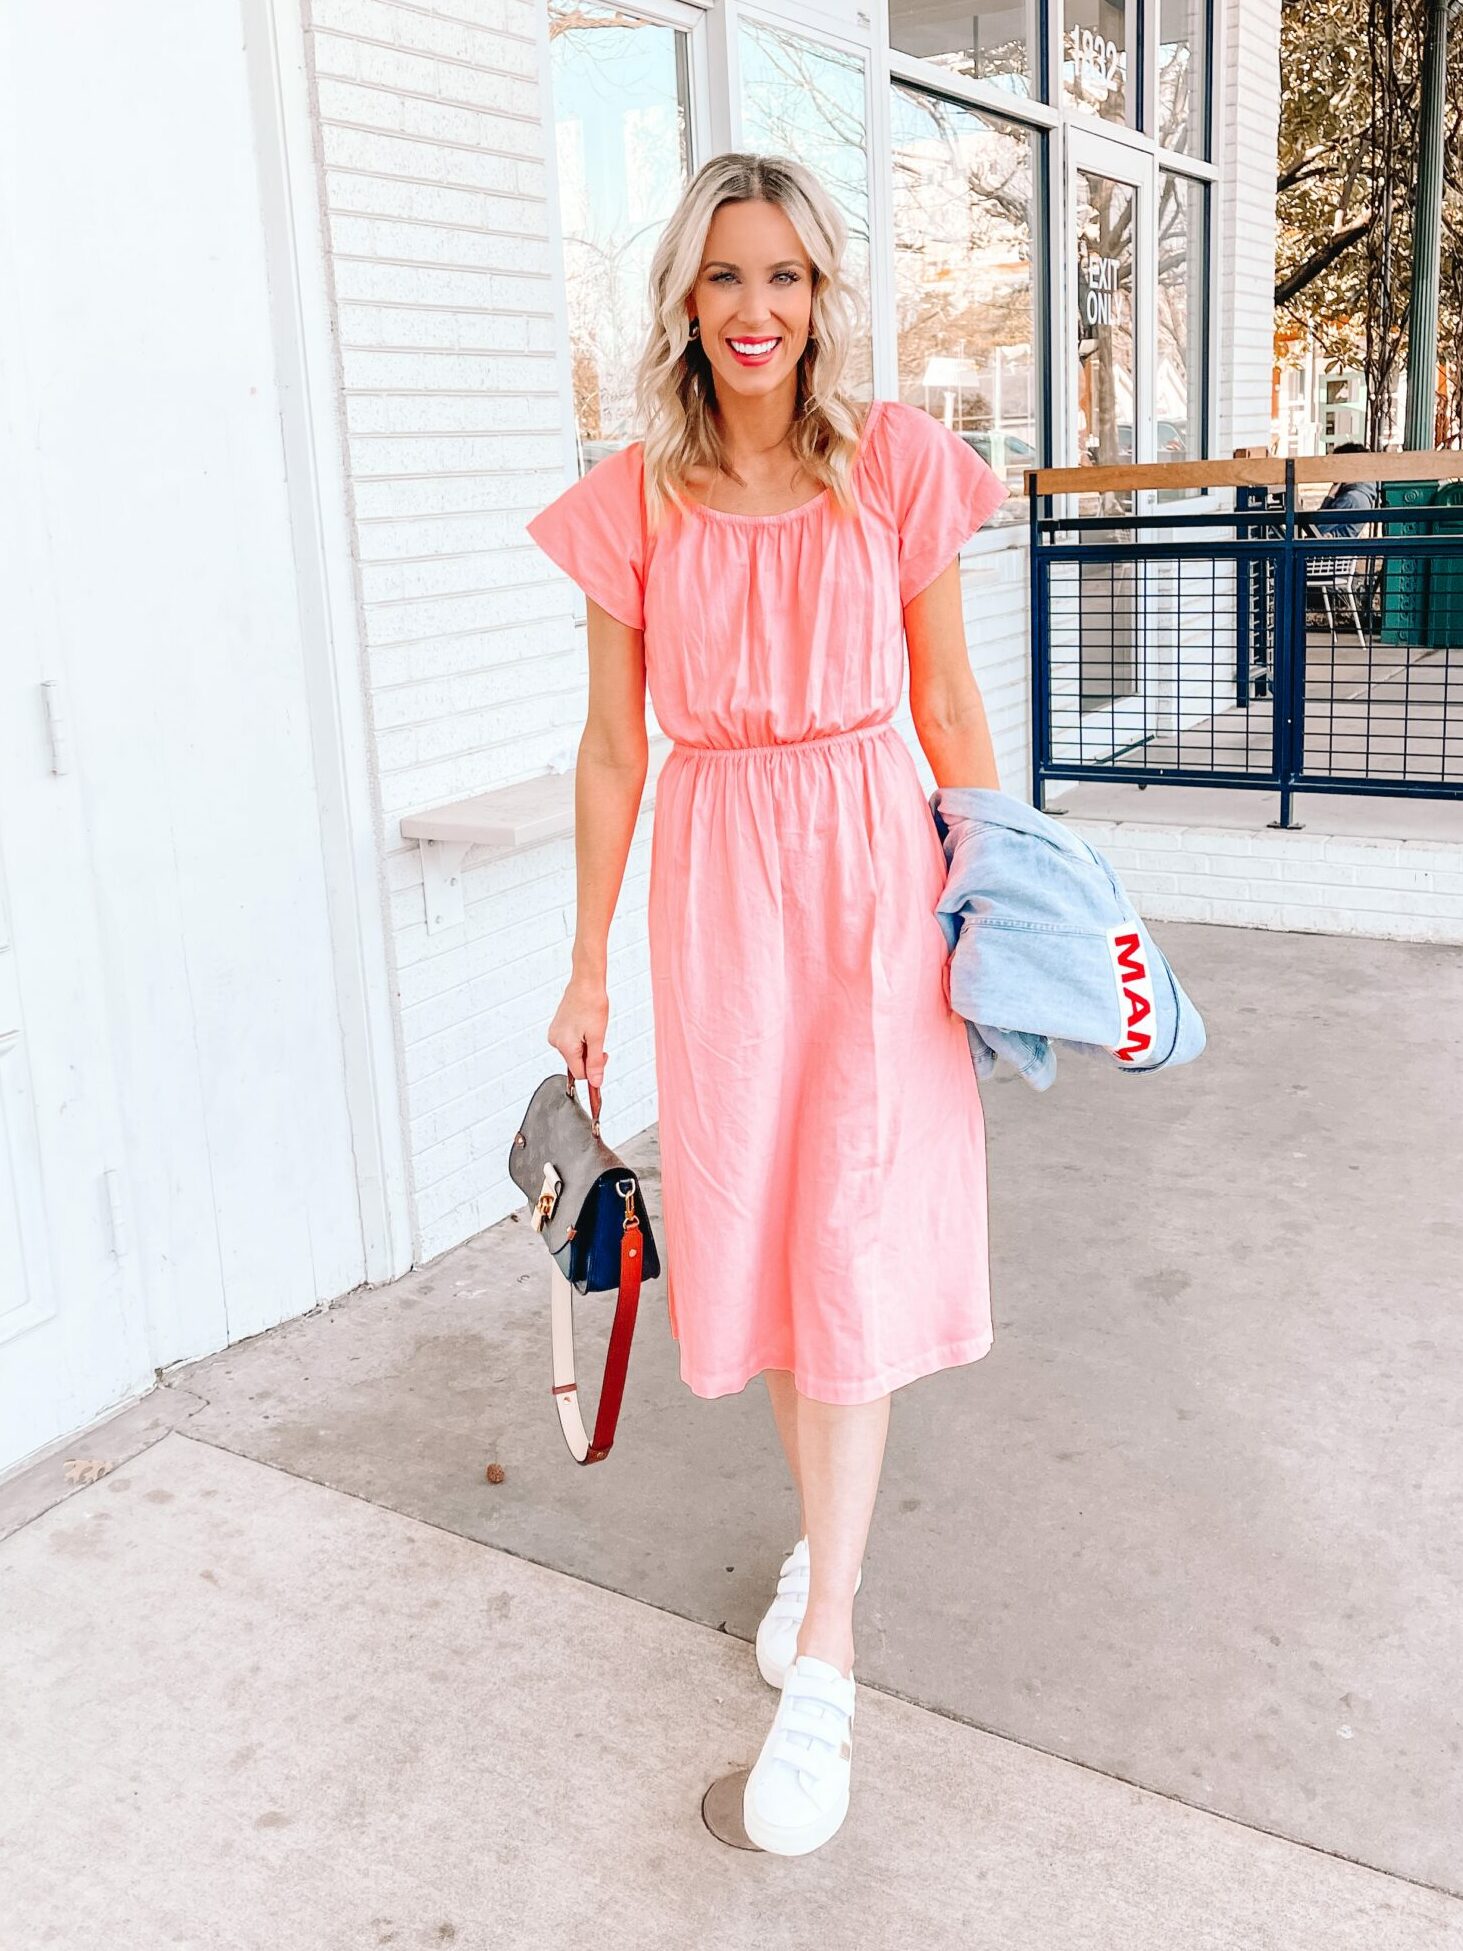 I am sharing a Target dress try on and sharing 5 fun dresses for spring and summer all $38 and under. You'll love this cute peach midi dress!